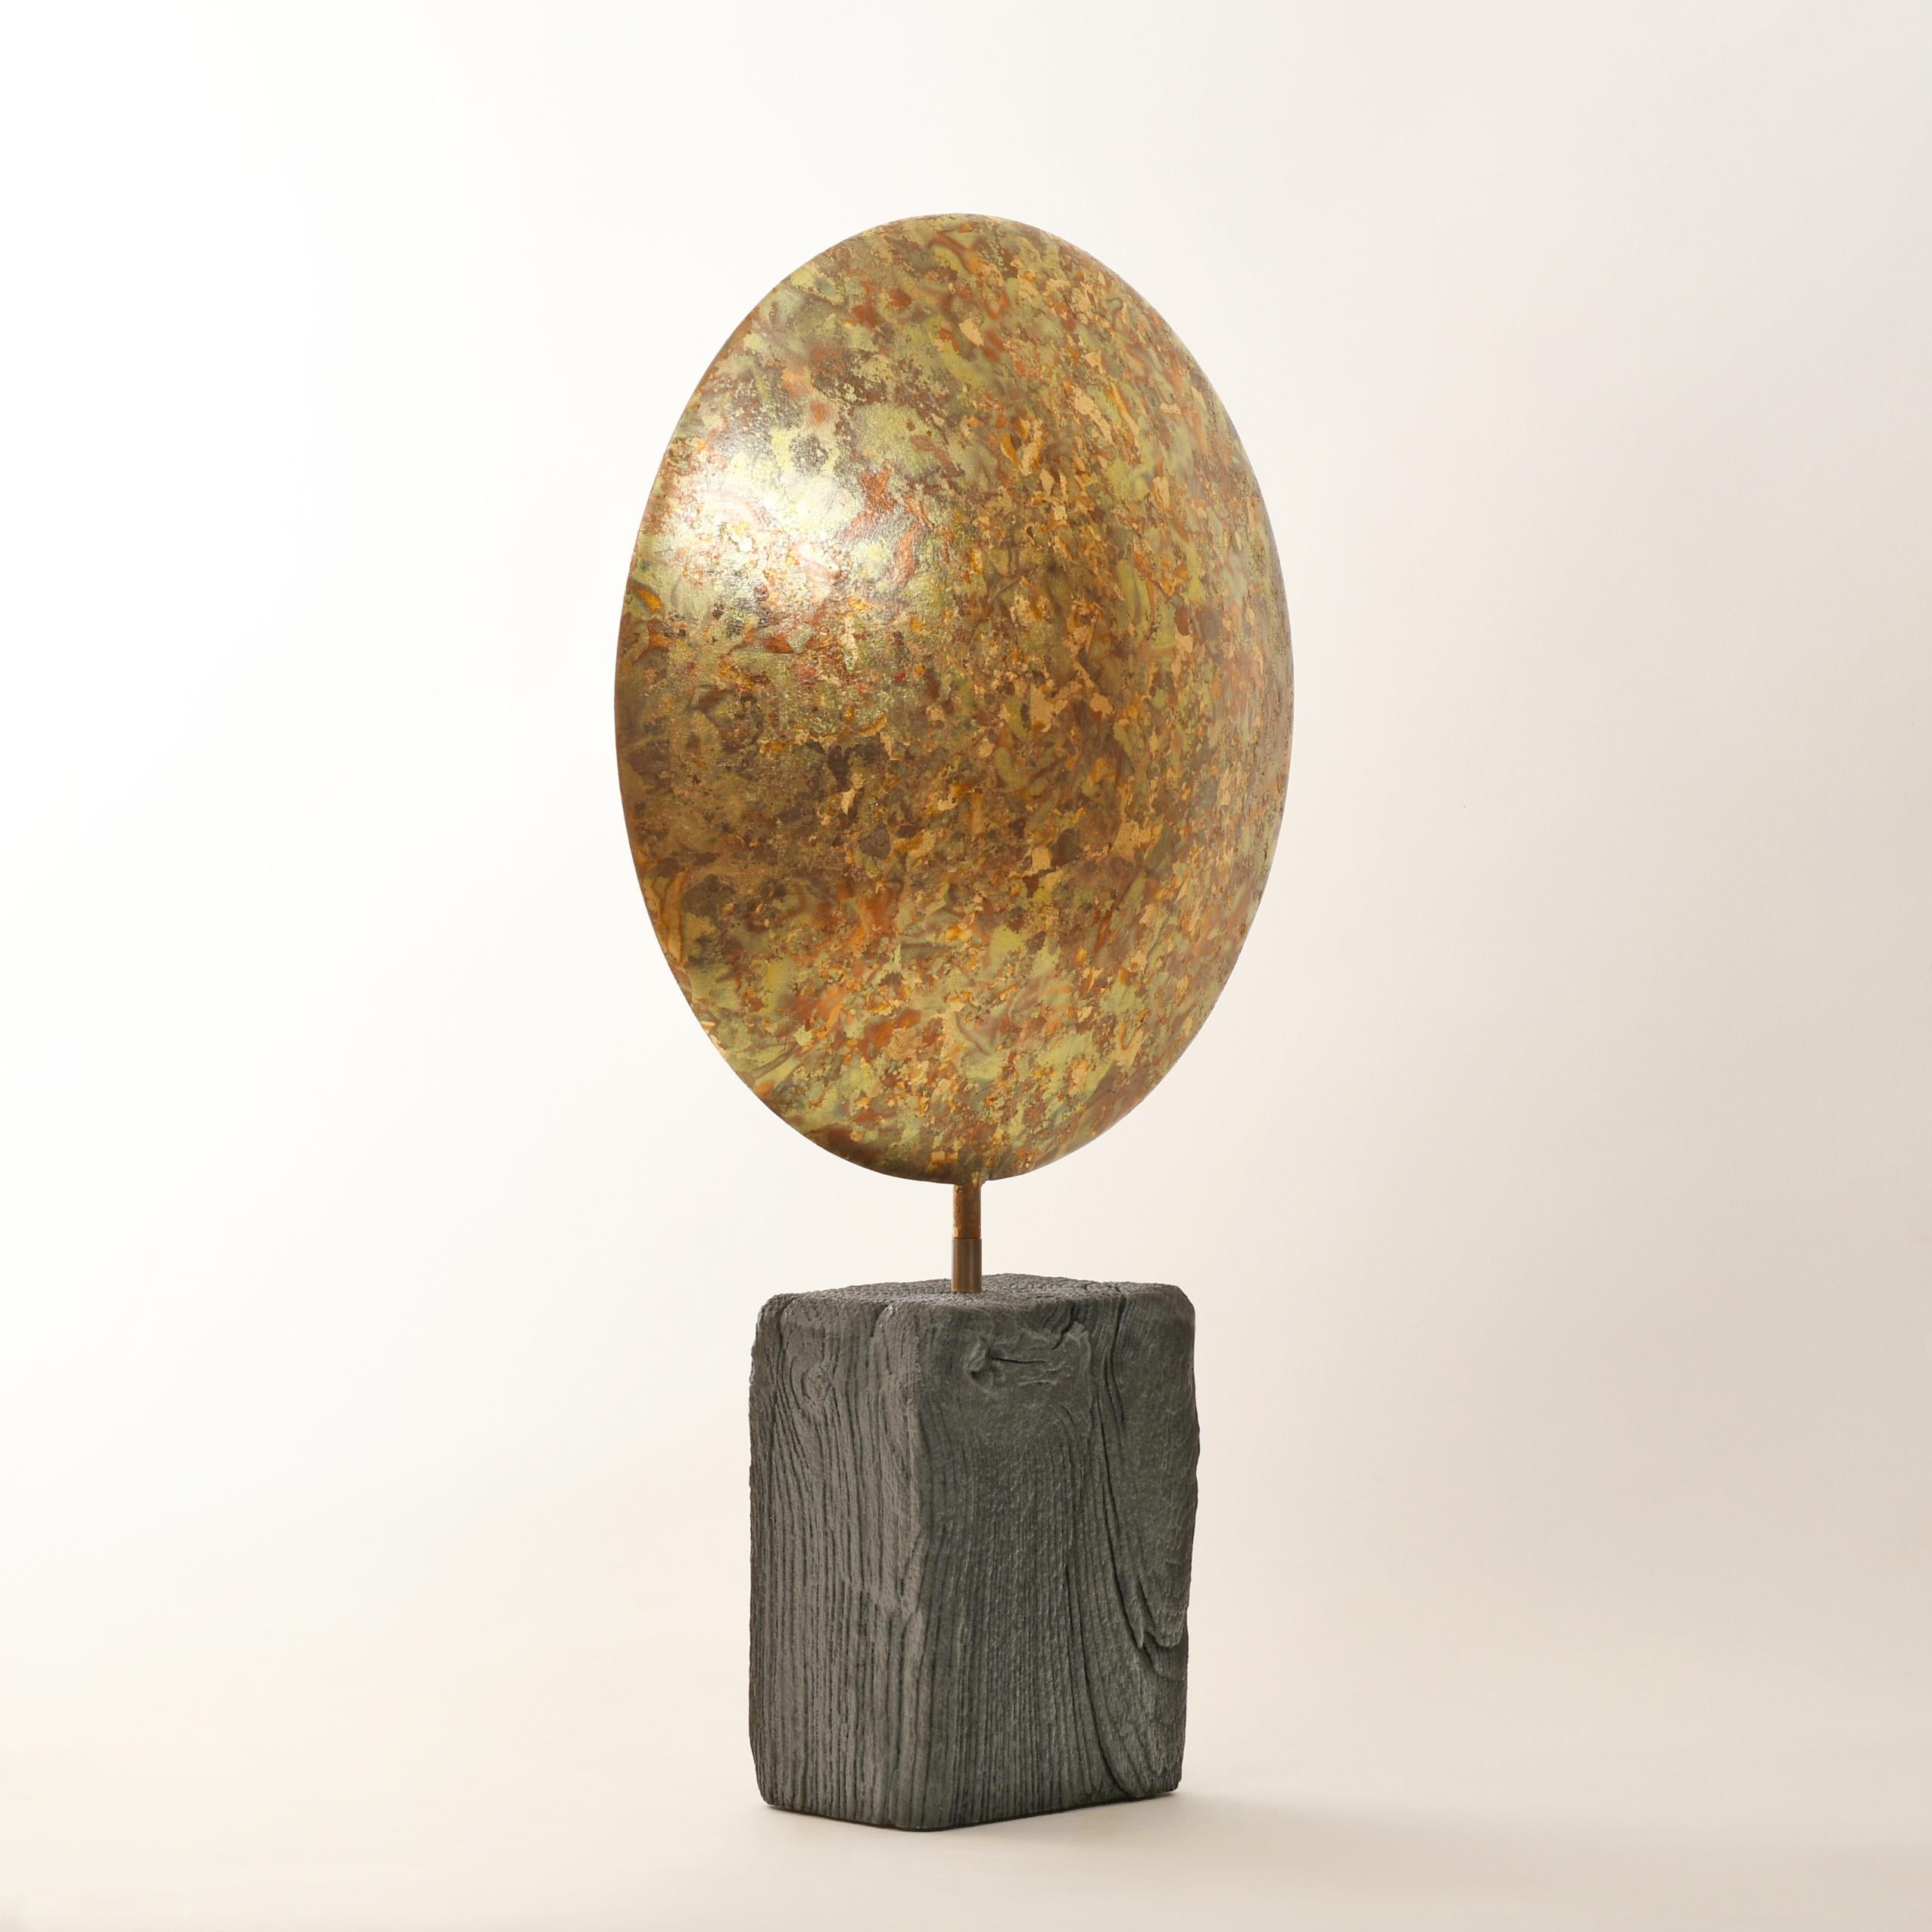 British Contemporary Sculpture by Philip Hearsey - Skyfire II For Sale 2